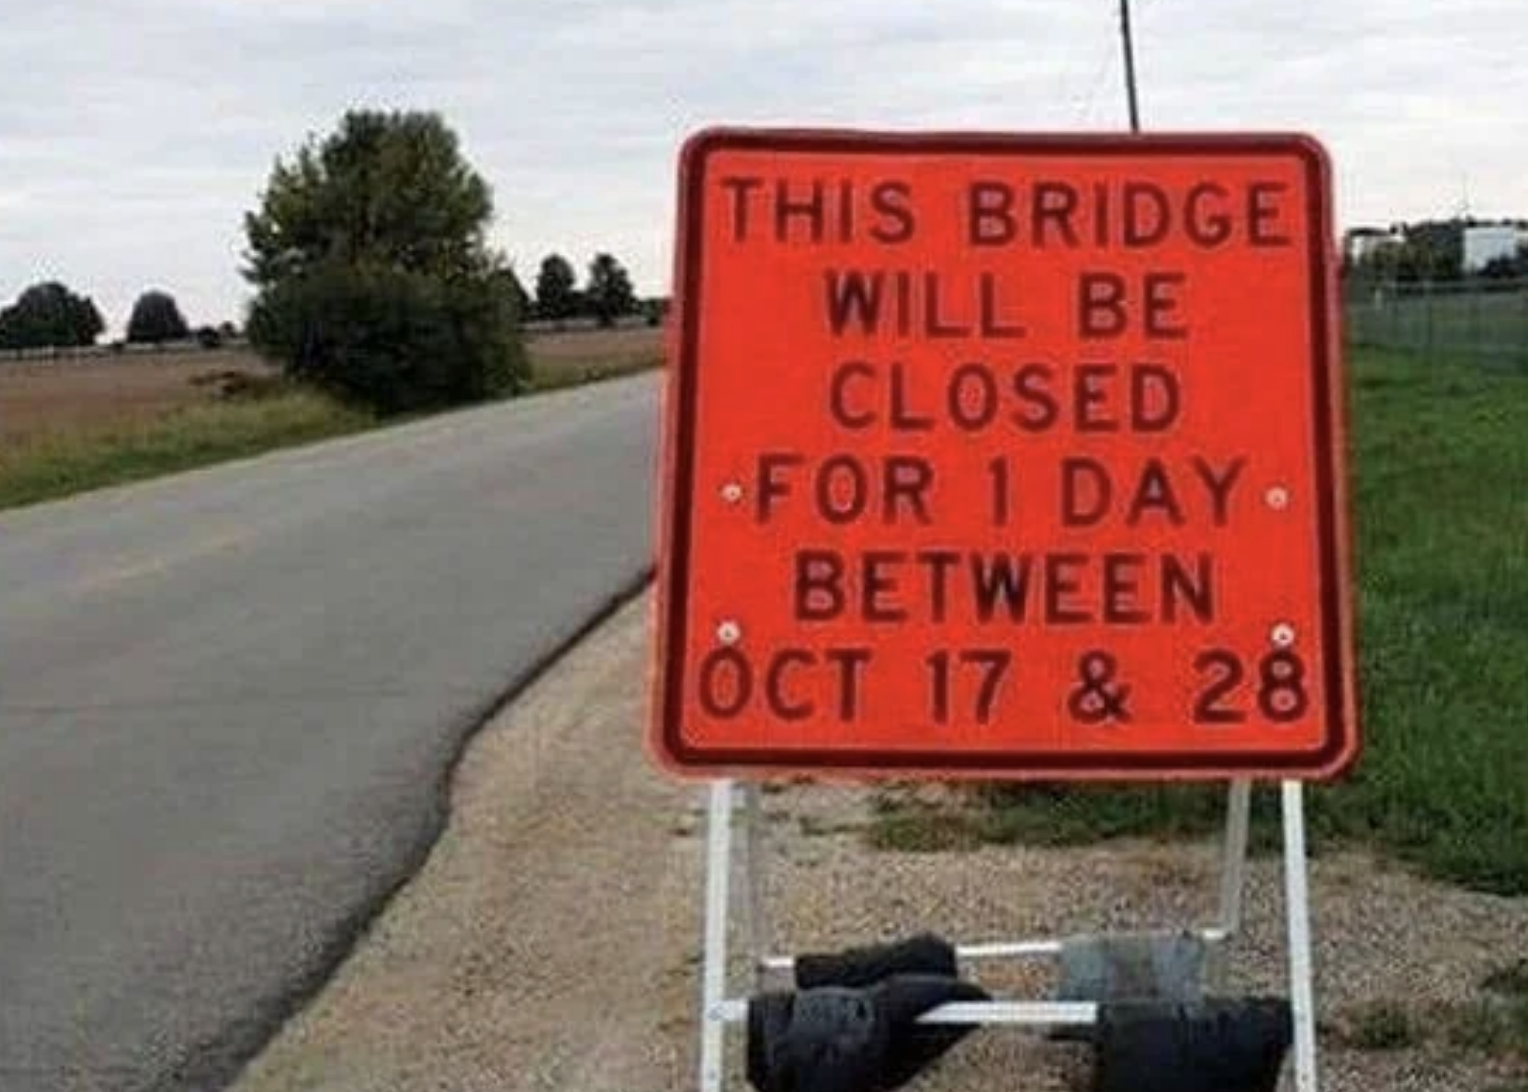 Sign announcing bridge closure for one day between October 17 and 28